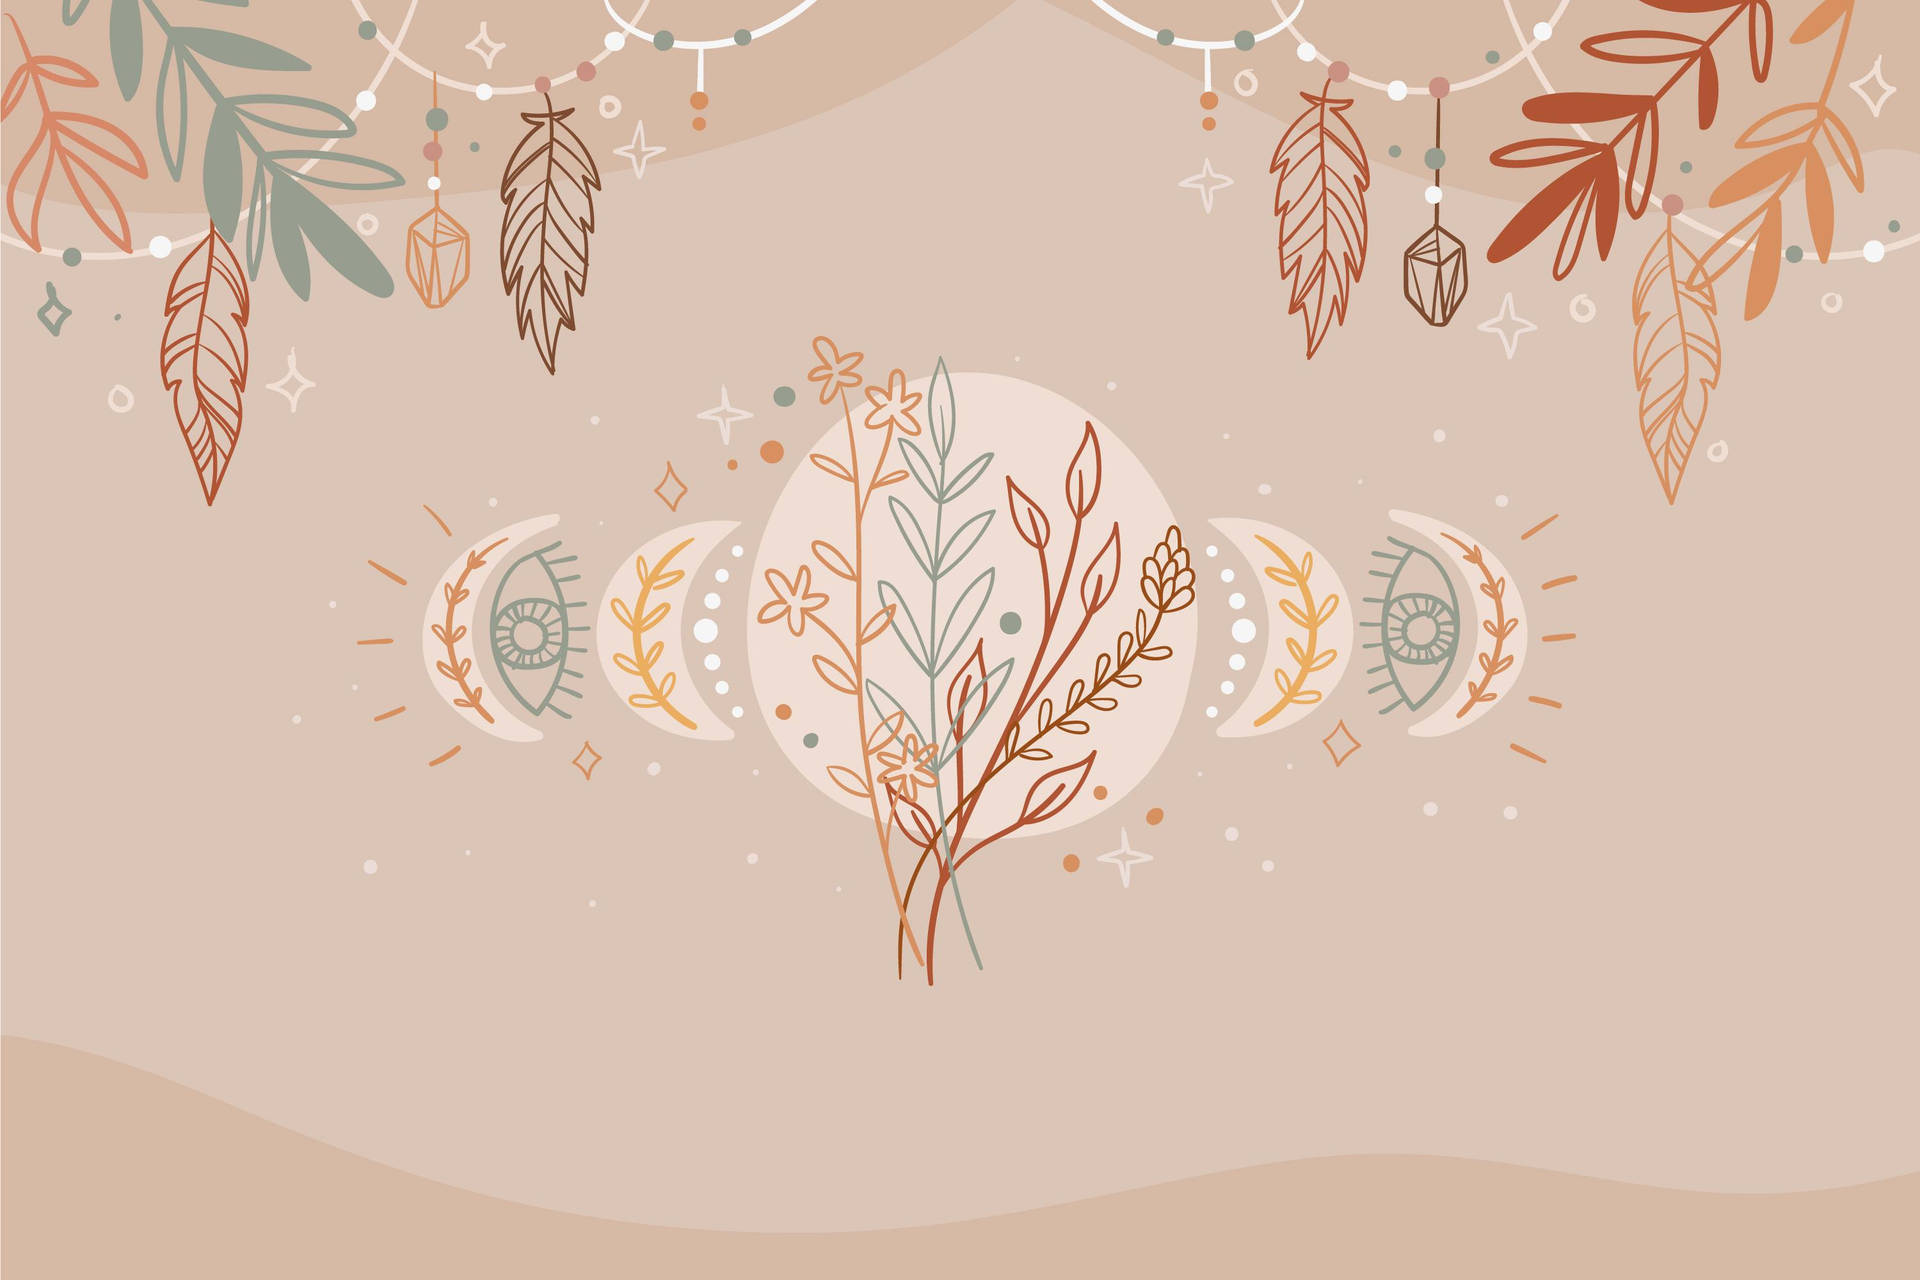 Aesthetic Boho Leaves And Moon Phases